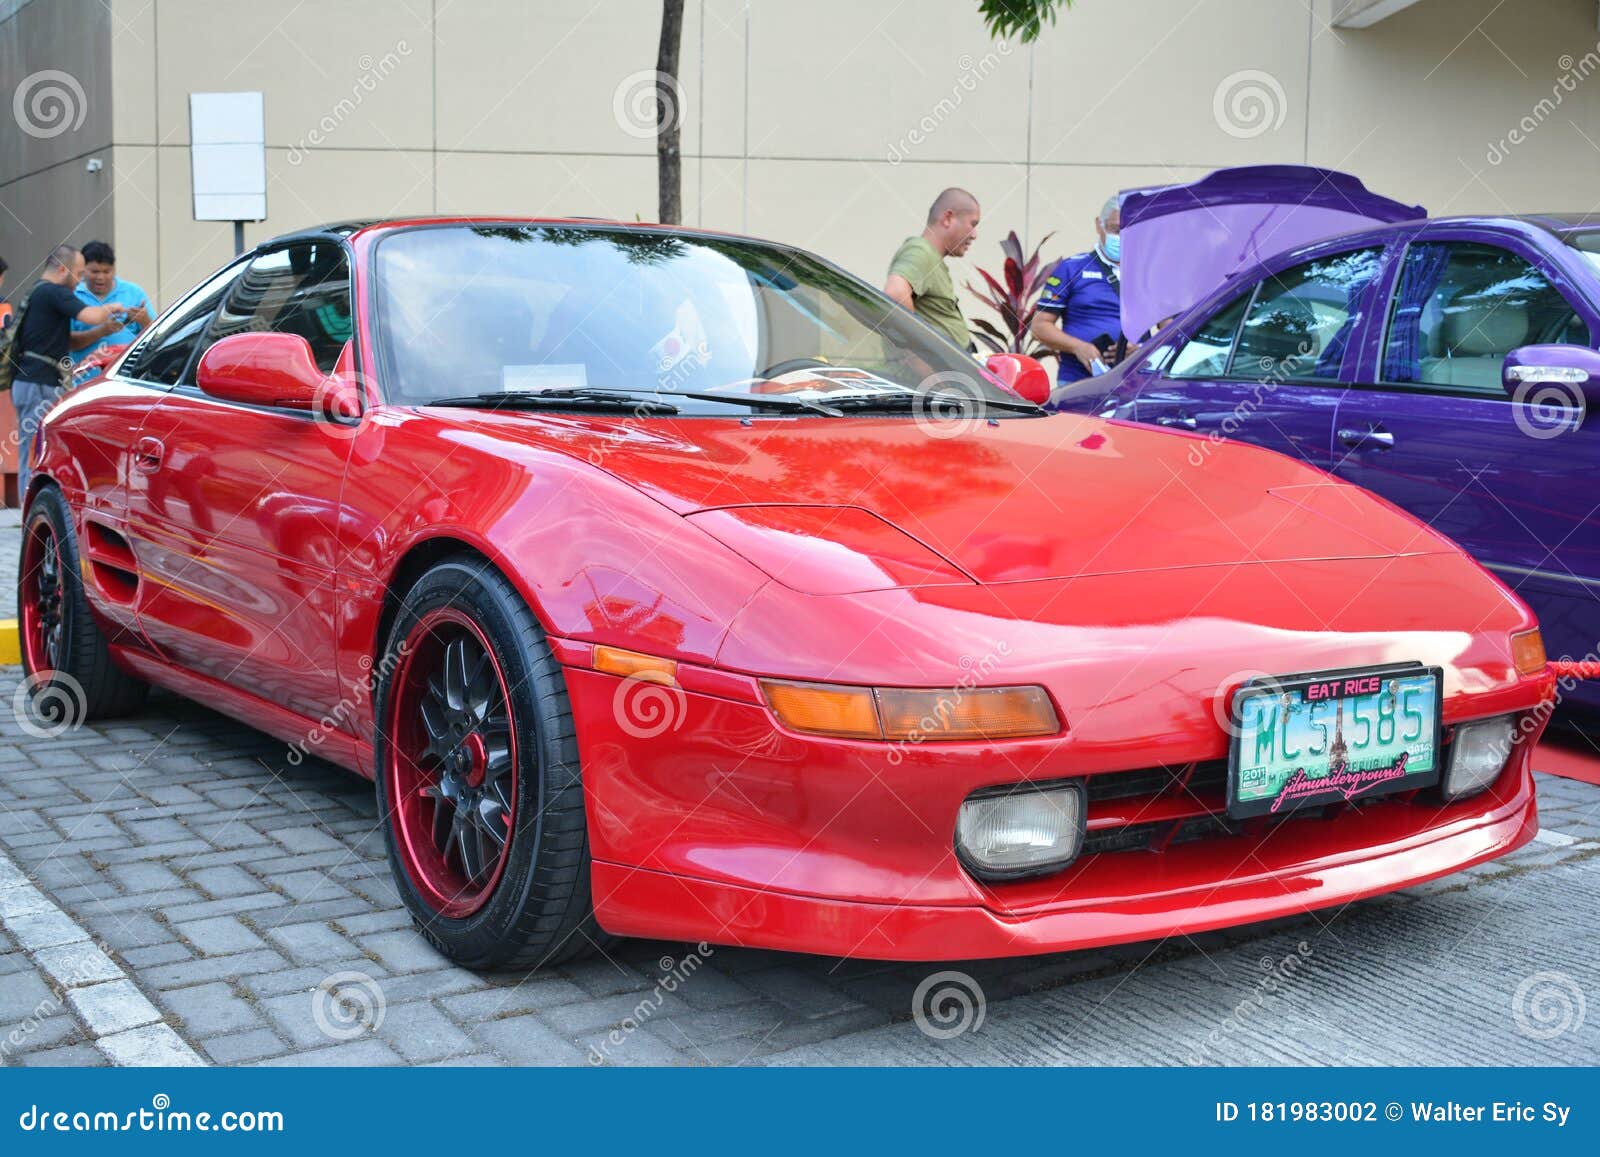 Toyota Mr2 Sw Gts In Quezon City Philippines Editorial Photography Image Of Expo Luzon